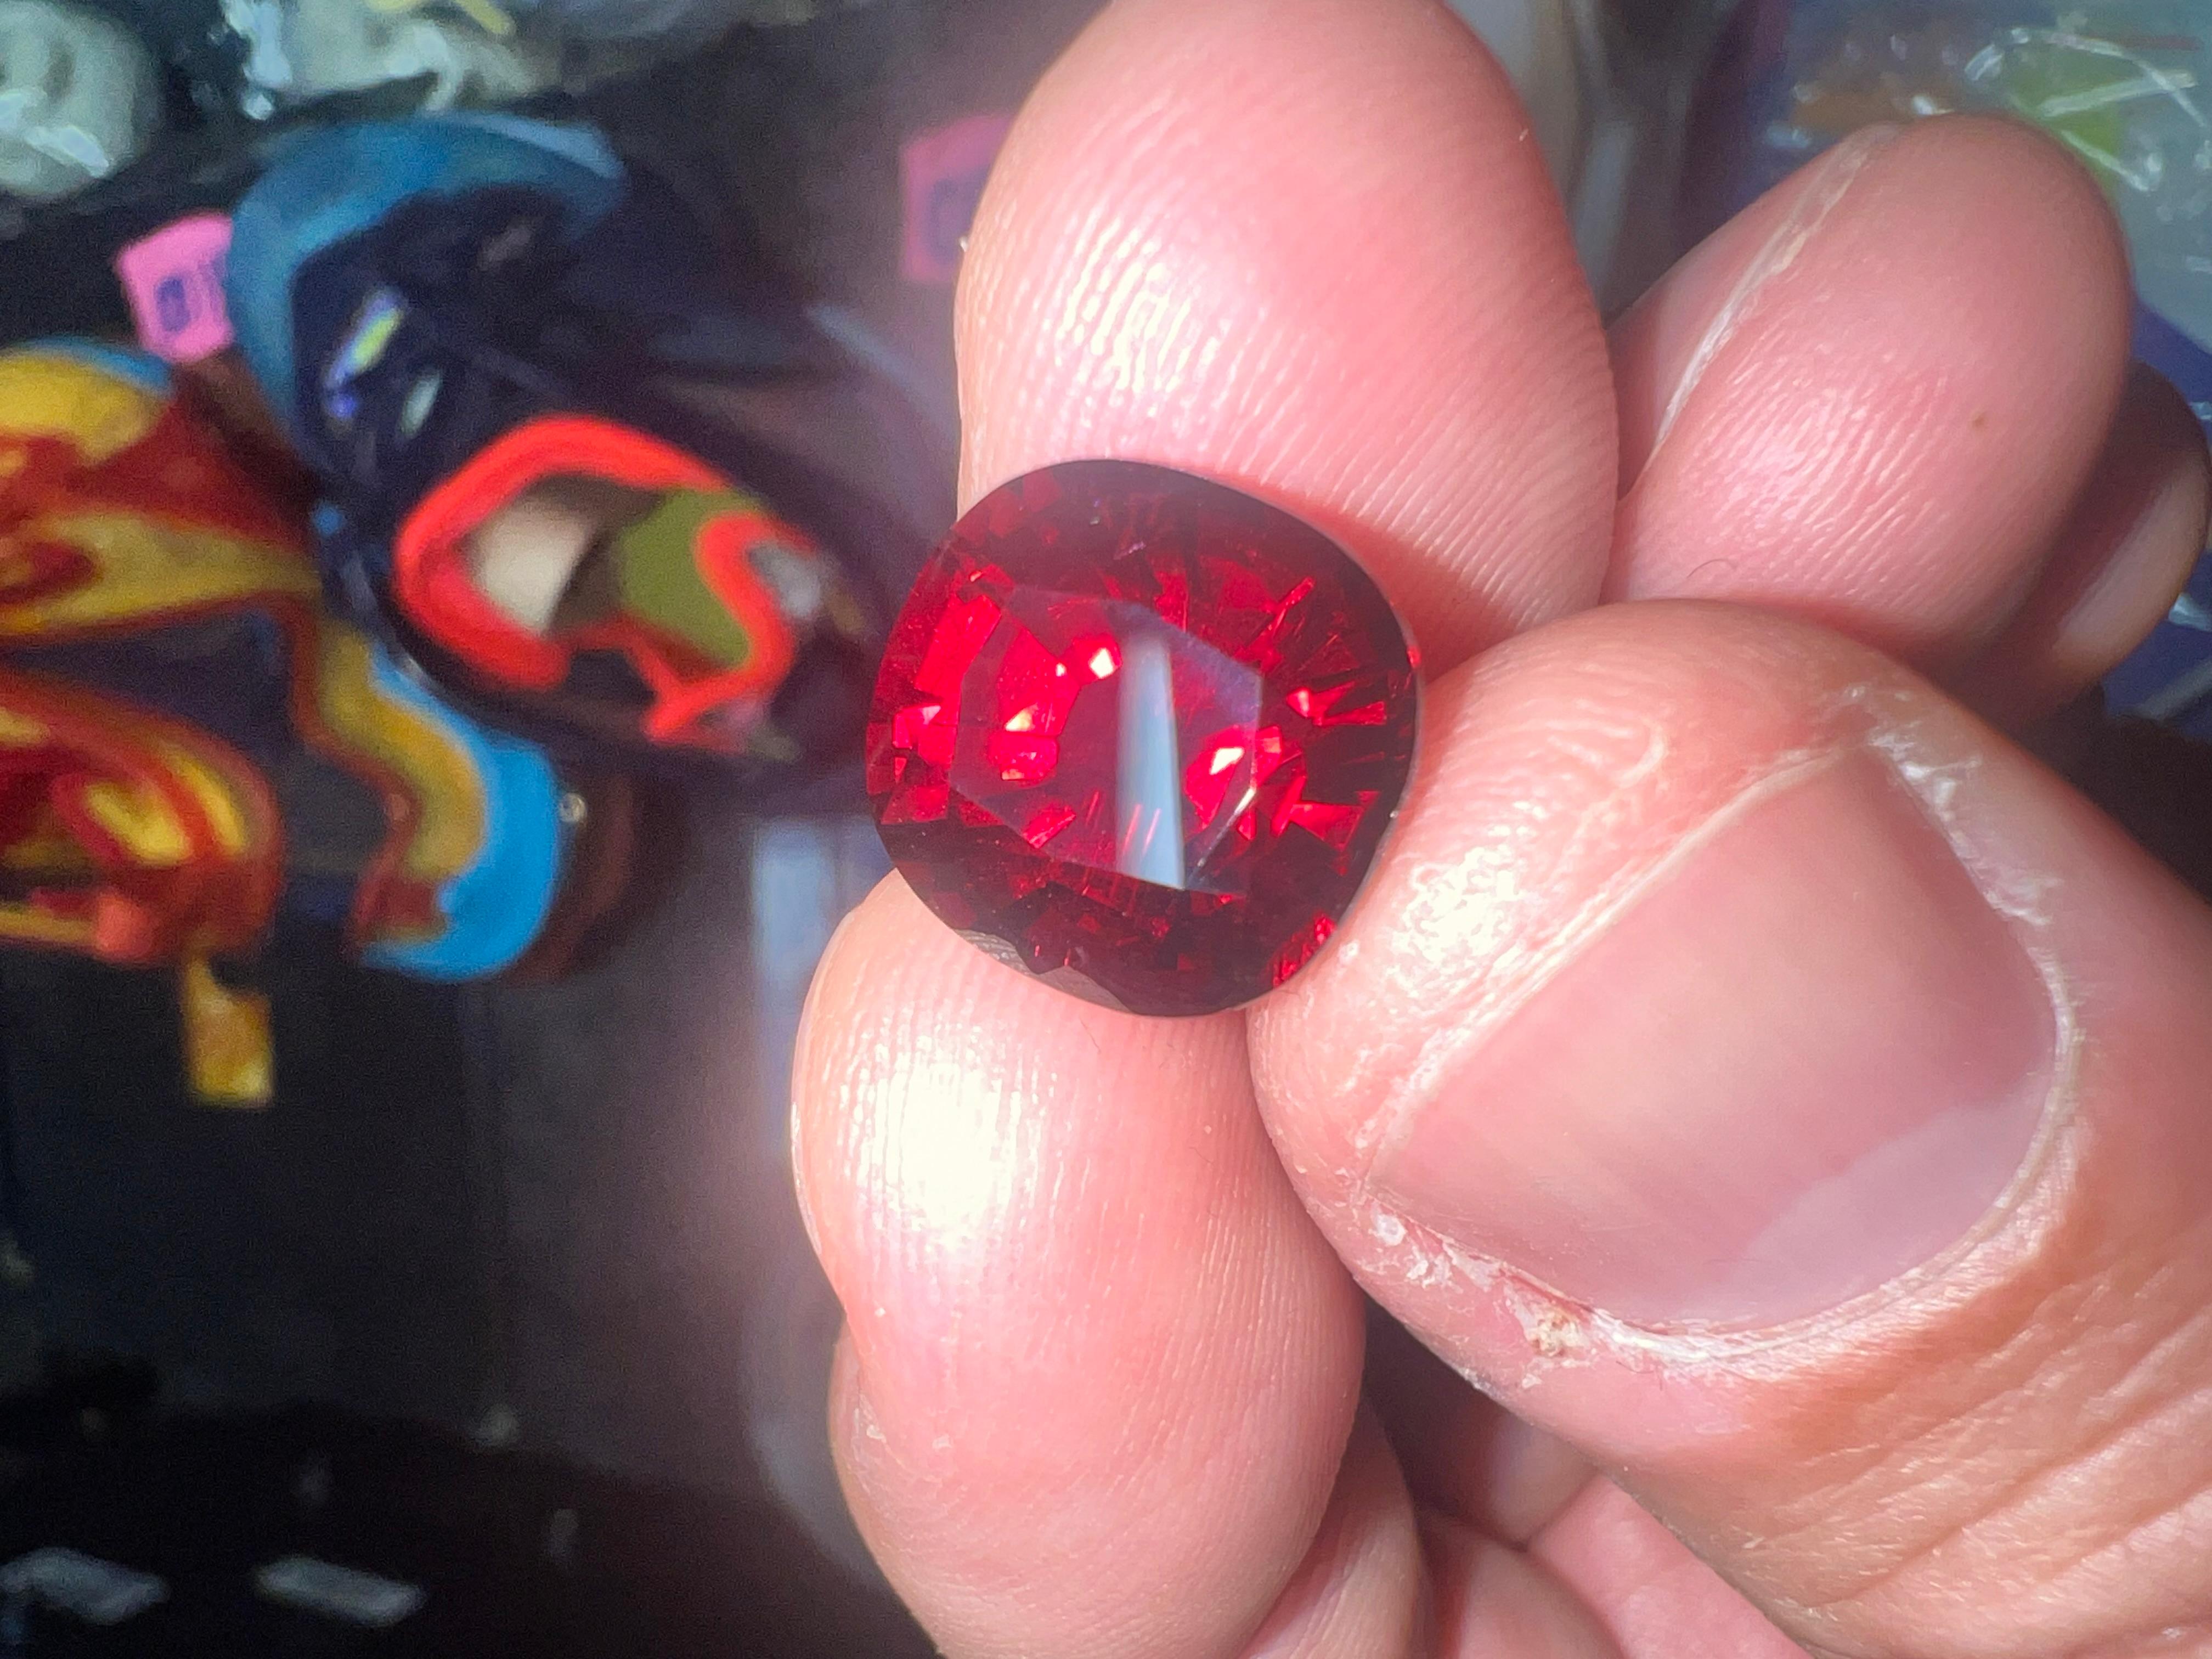 This beautiful Red Spinel was mined in Luc Yen Vietnam decades ago and just now being brought to market. It’s extremely Vivid Red and near Flawless. Completely EyeClean with near Loupe Clean appearance. It’s next to impossible to find Red Spinel in